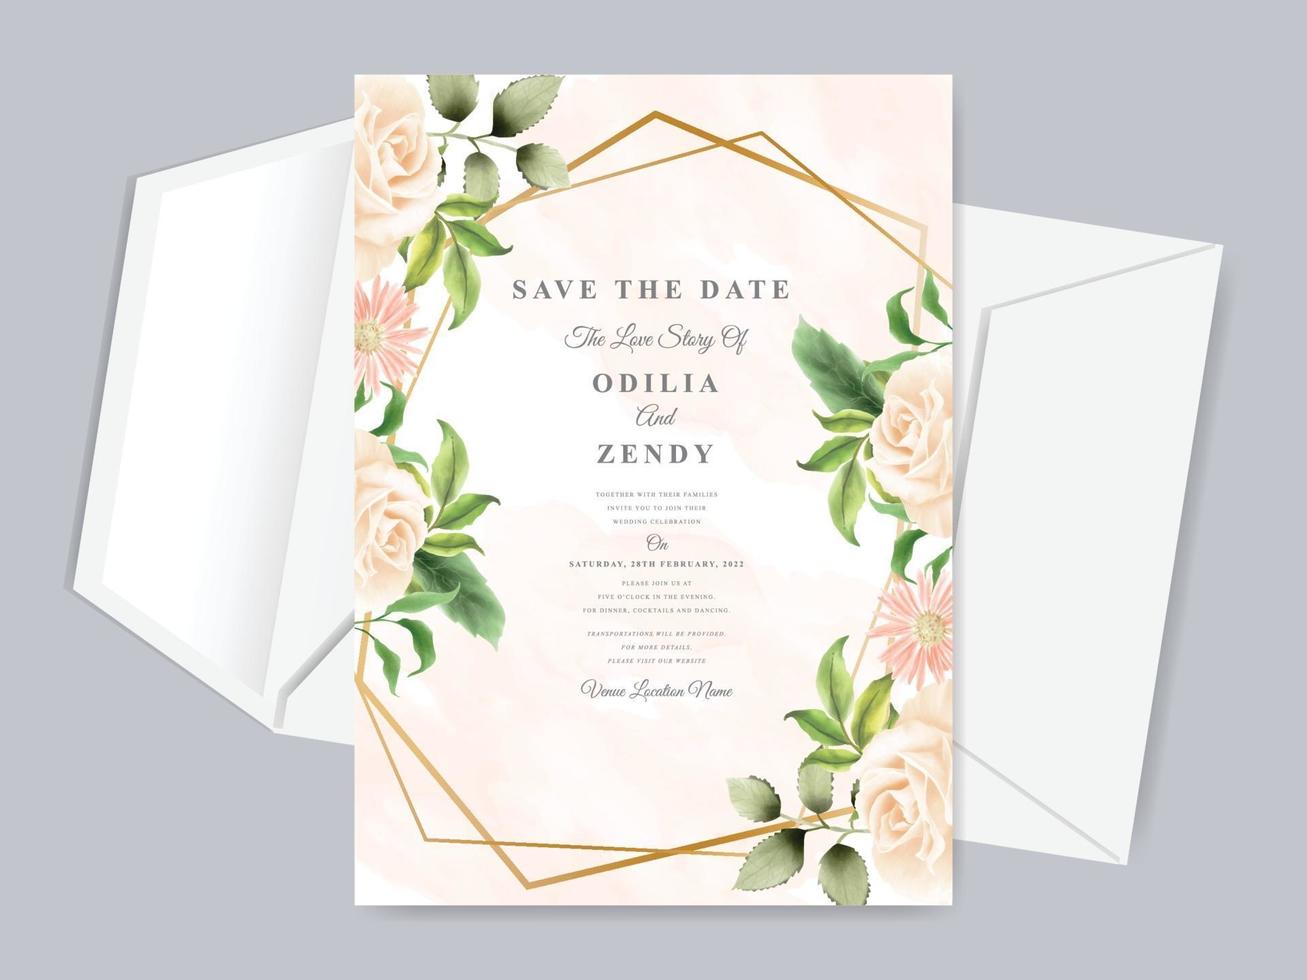 Beautiful floral hand drawn wedding save the date invitation card template vector